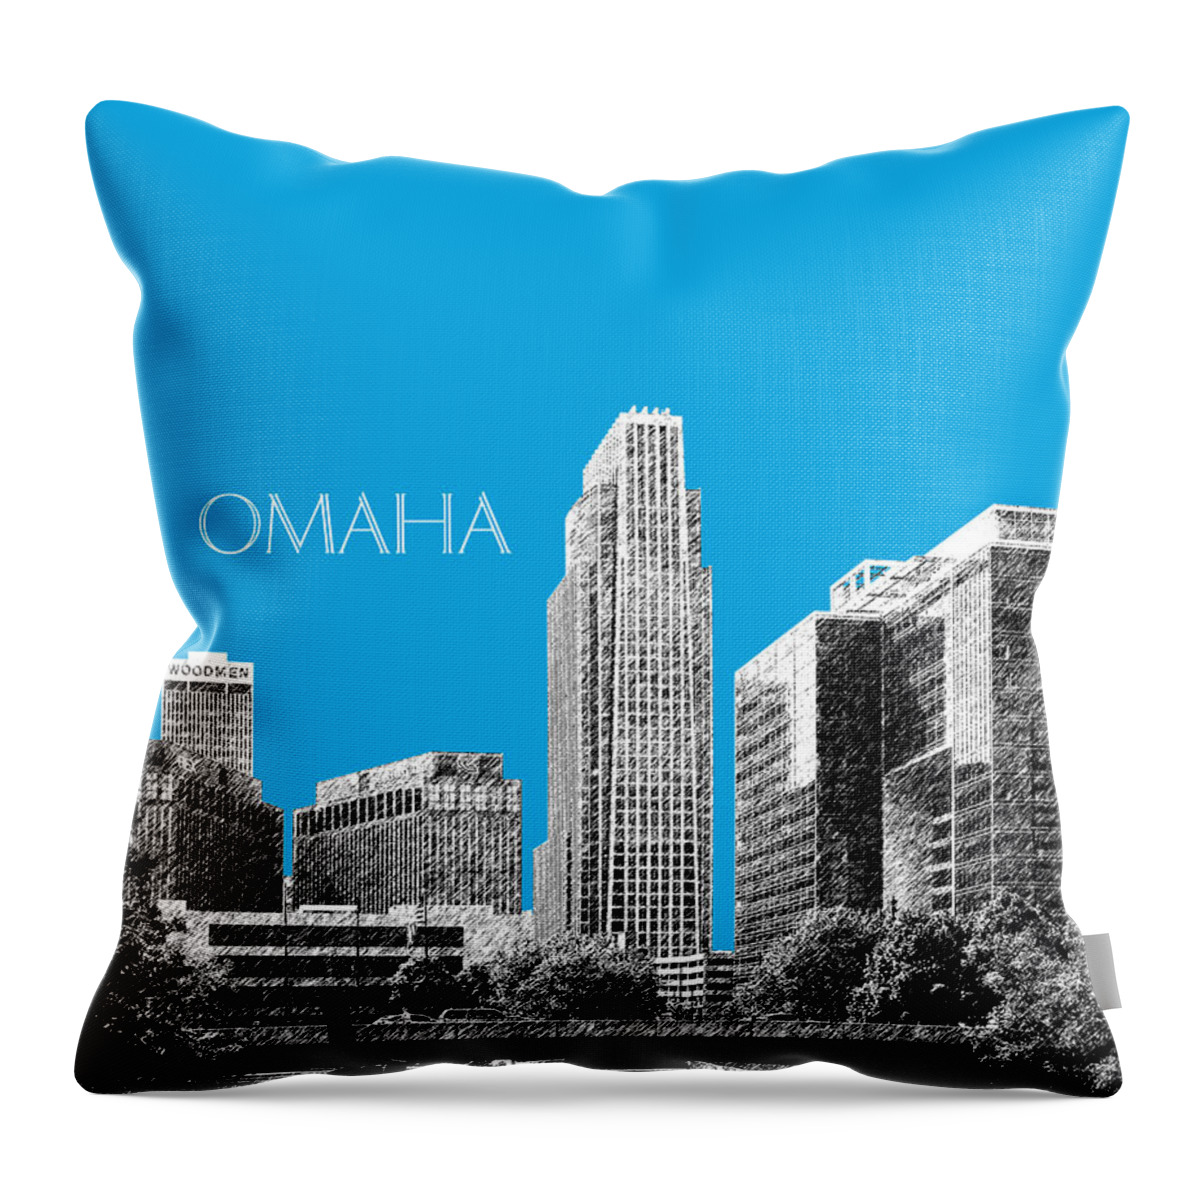 Architecture Throw Pillow featuring the digital art Omaha Skyline - Ice Blue by DB Artist